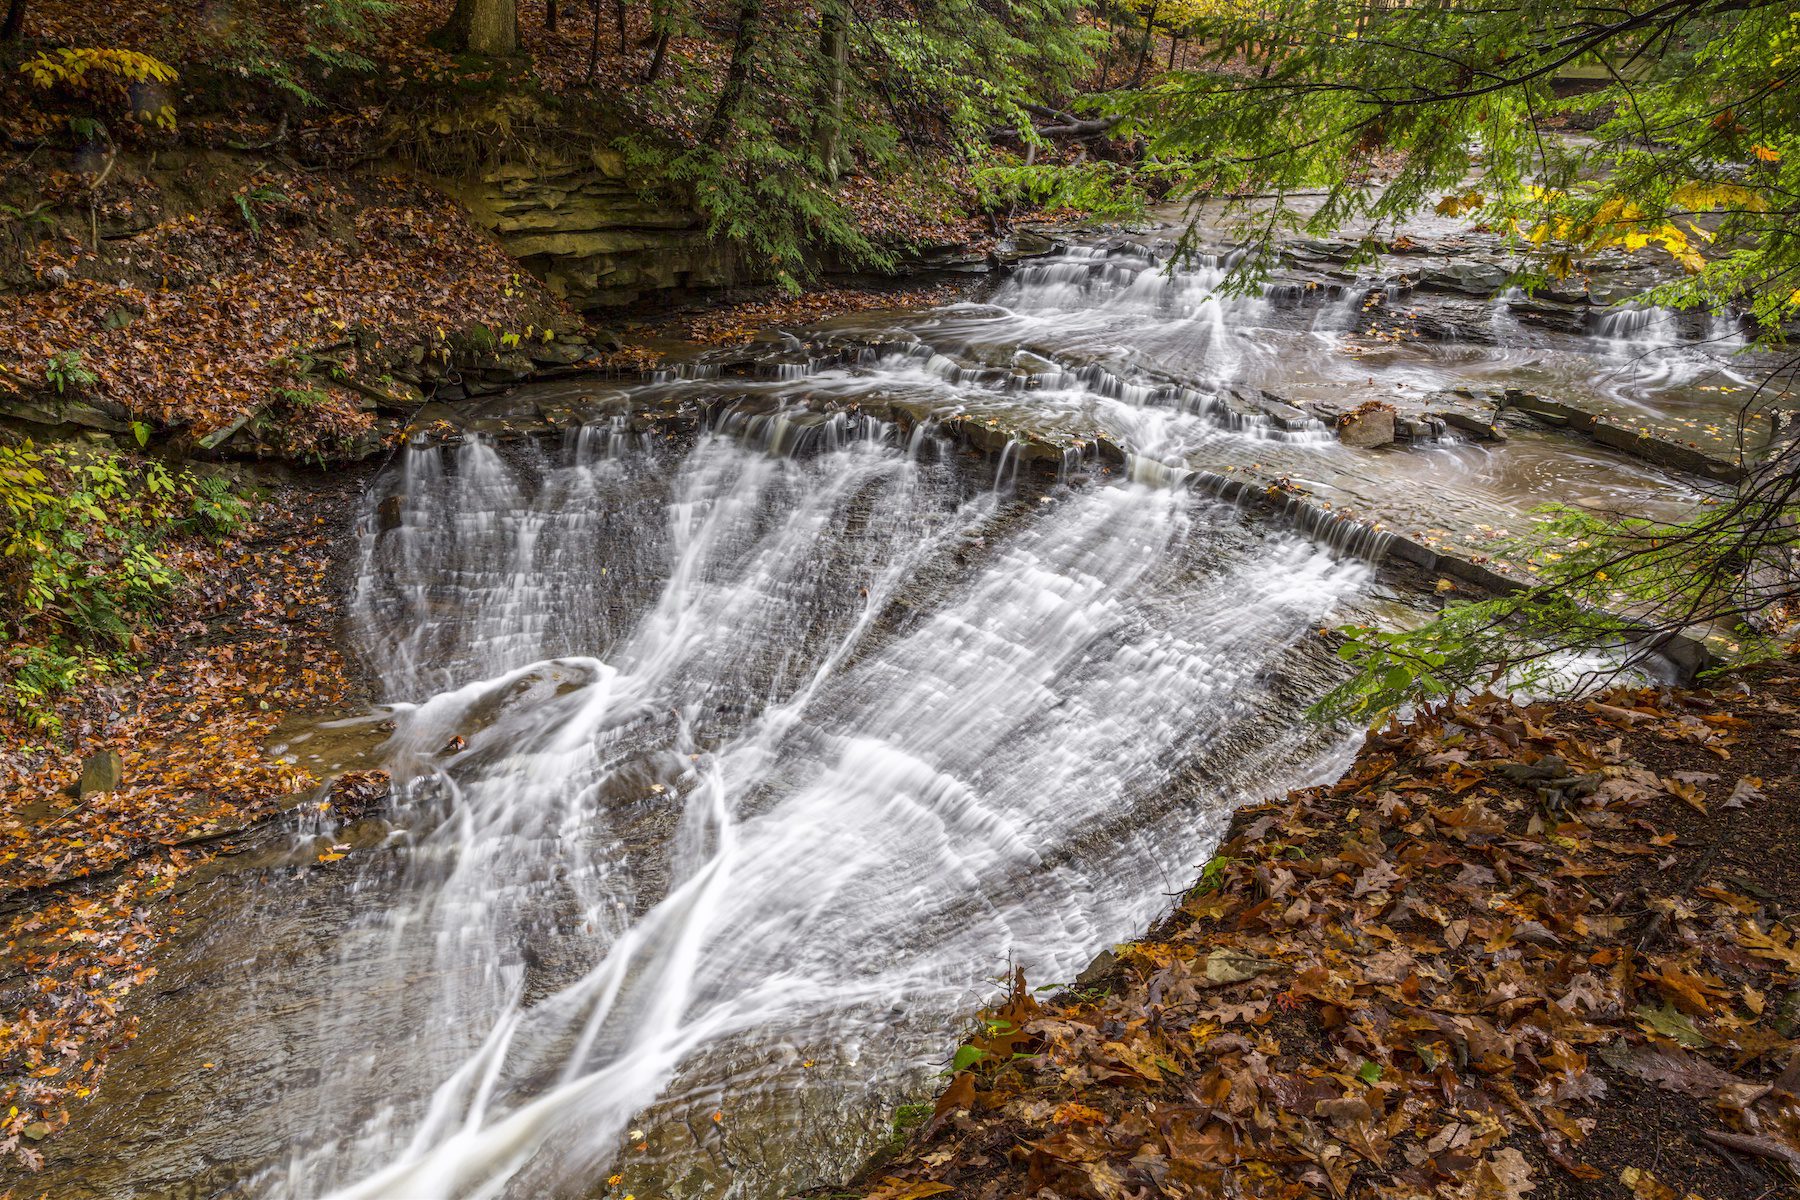 Whitewater cascades over rock ledges of beautiful Bridal Veil Falls, a waterfall photographed in the colorful autumn landscape of Cuyahoga Valley National Park of northeast Ohio.